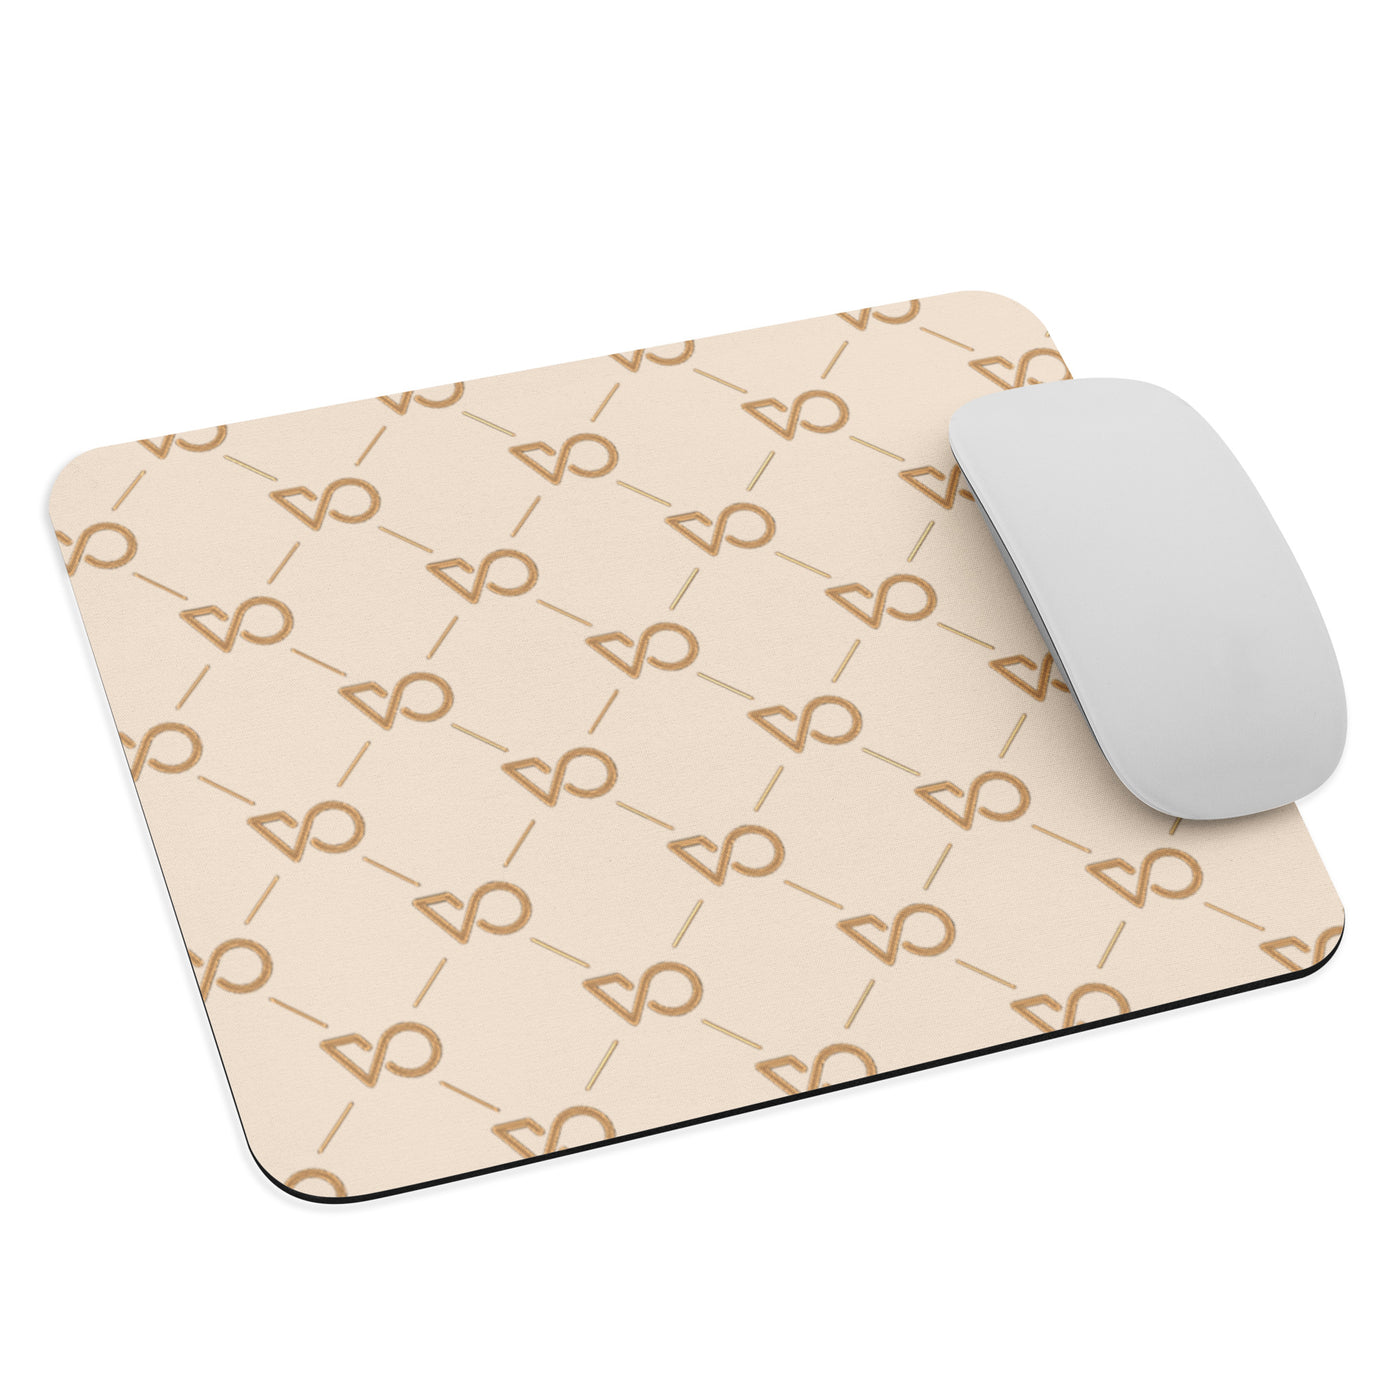 GOLD VO Mouse pad